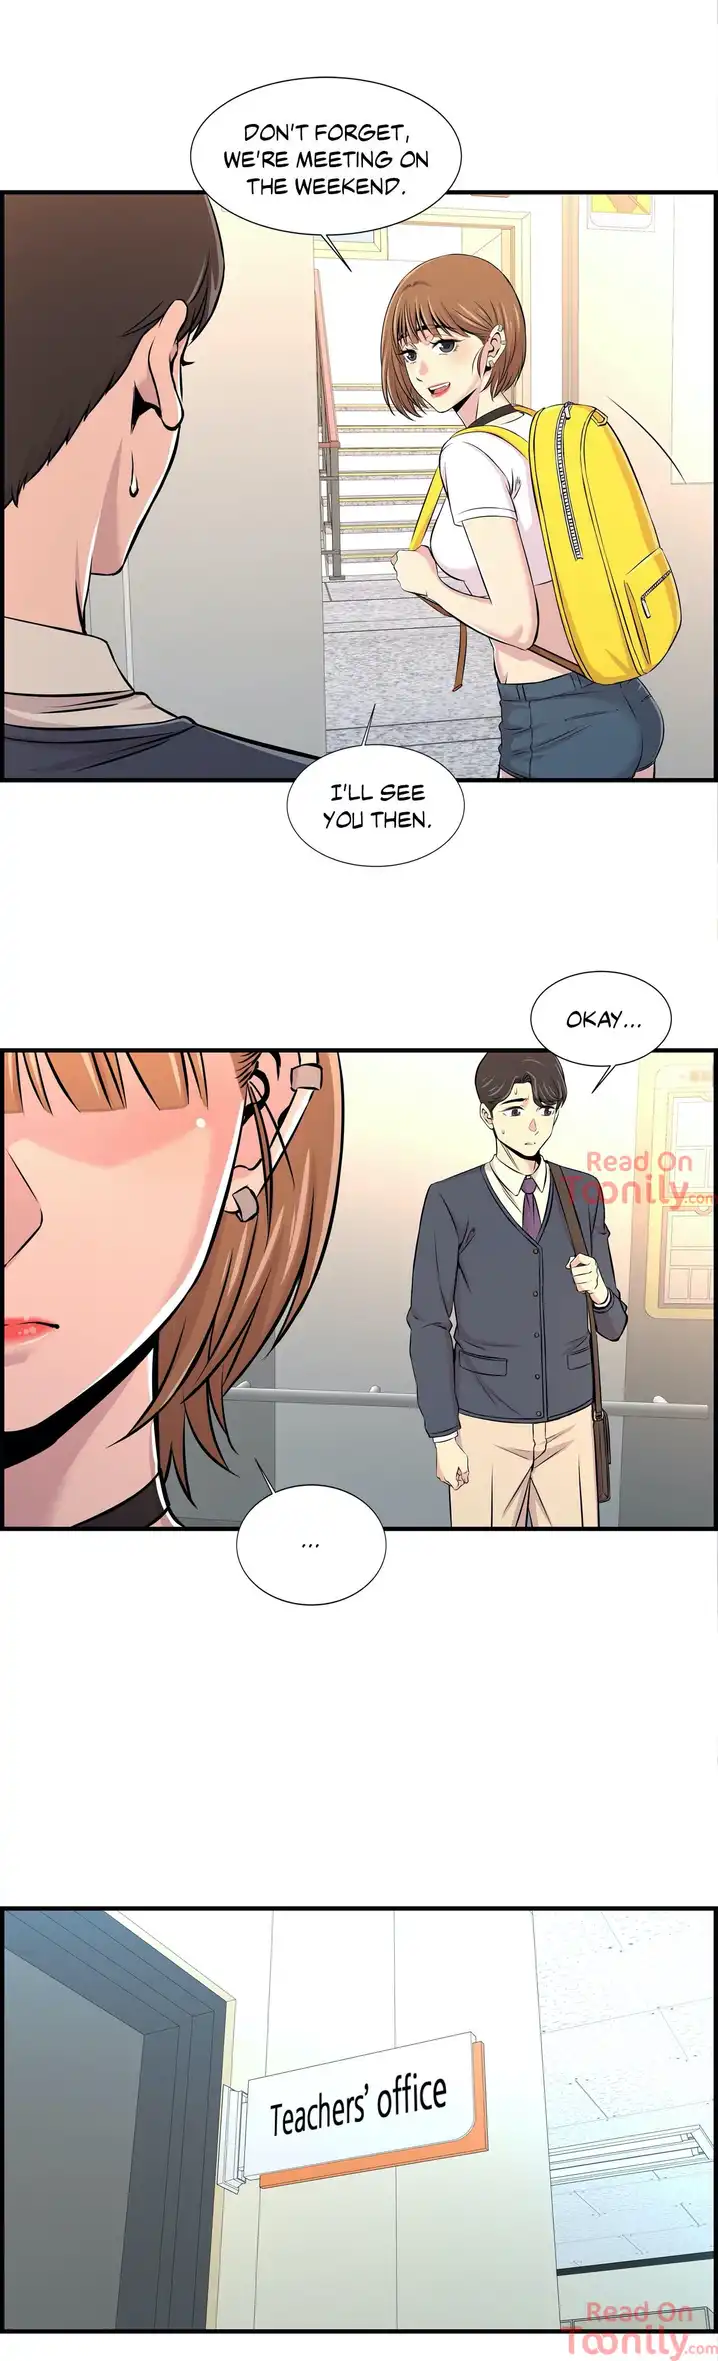 Cram School Scandal - Chapter 13 Page 6